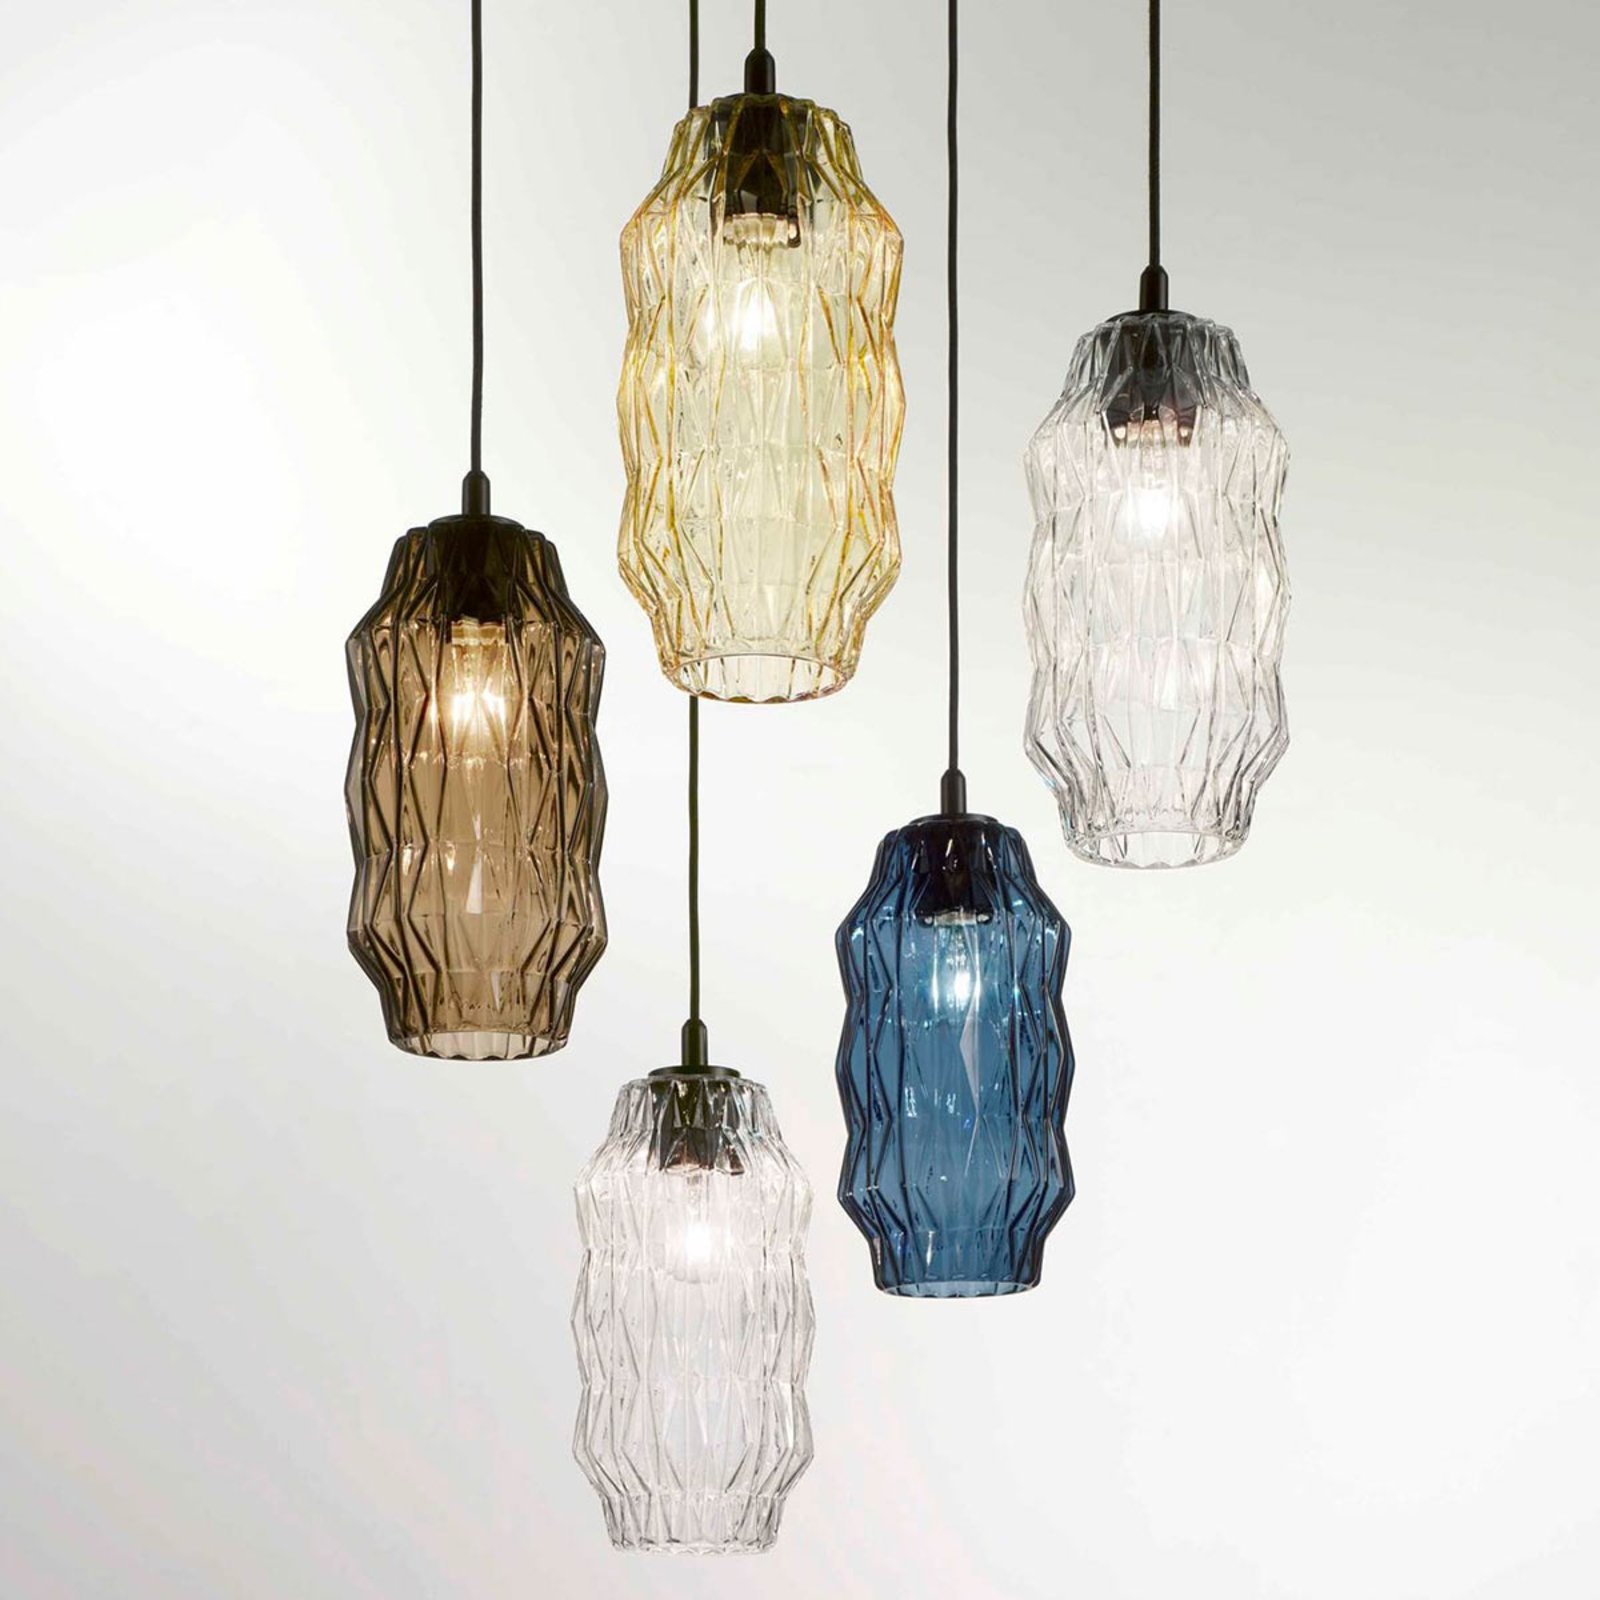 Origami pendant light made of glass, amber